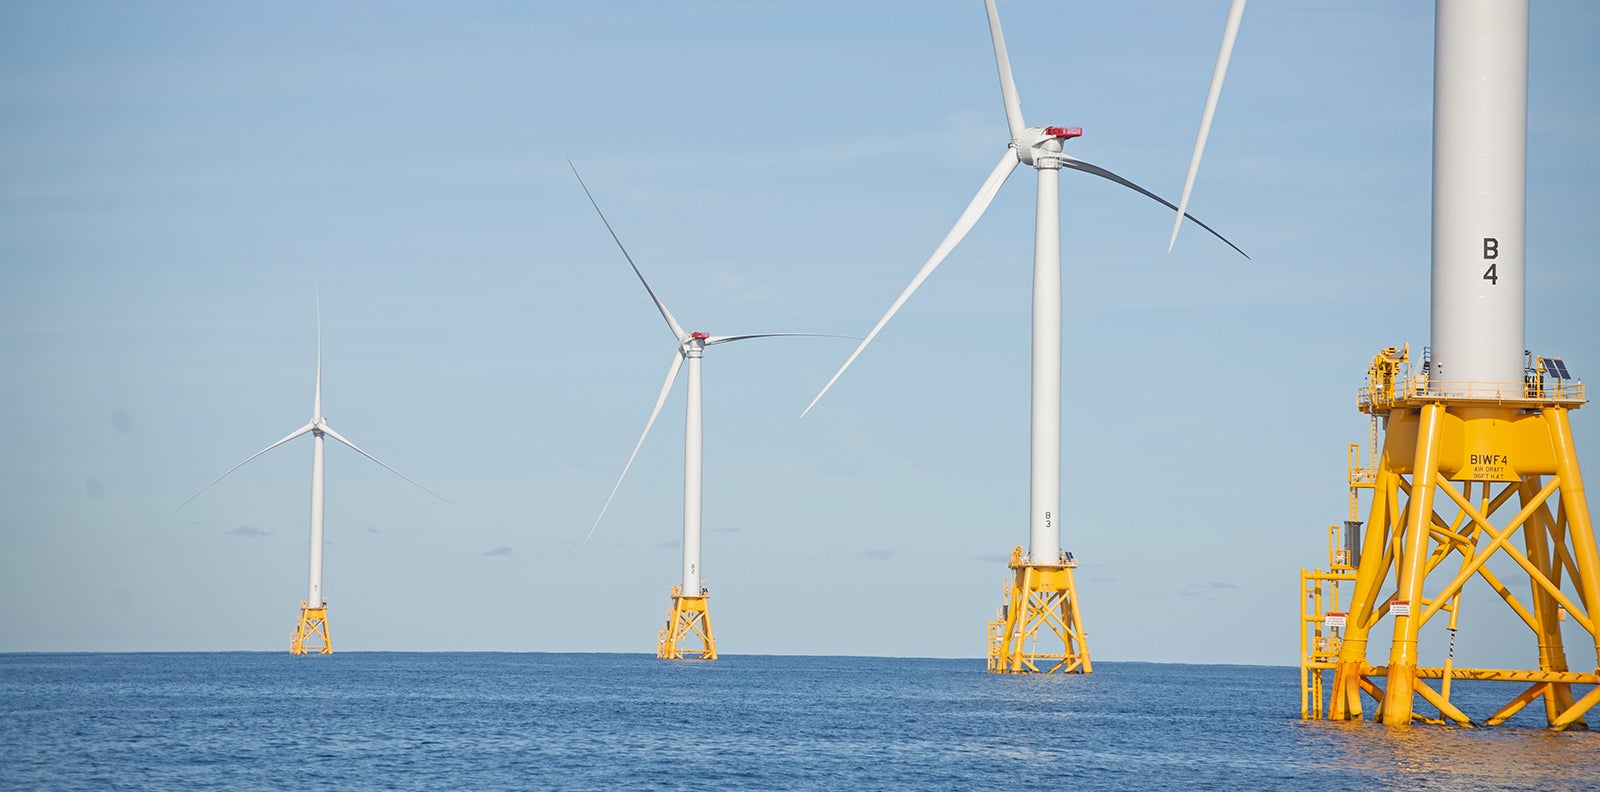 Do Offshore Wind Farms Impact Fishing?